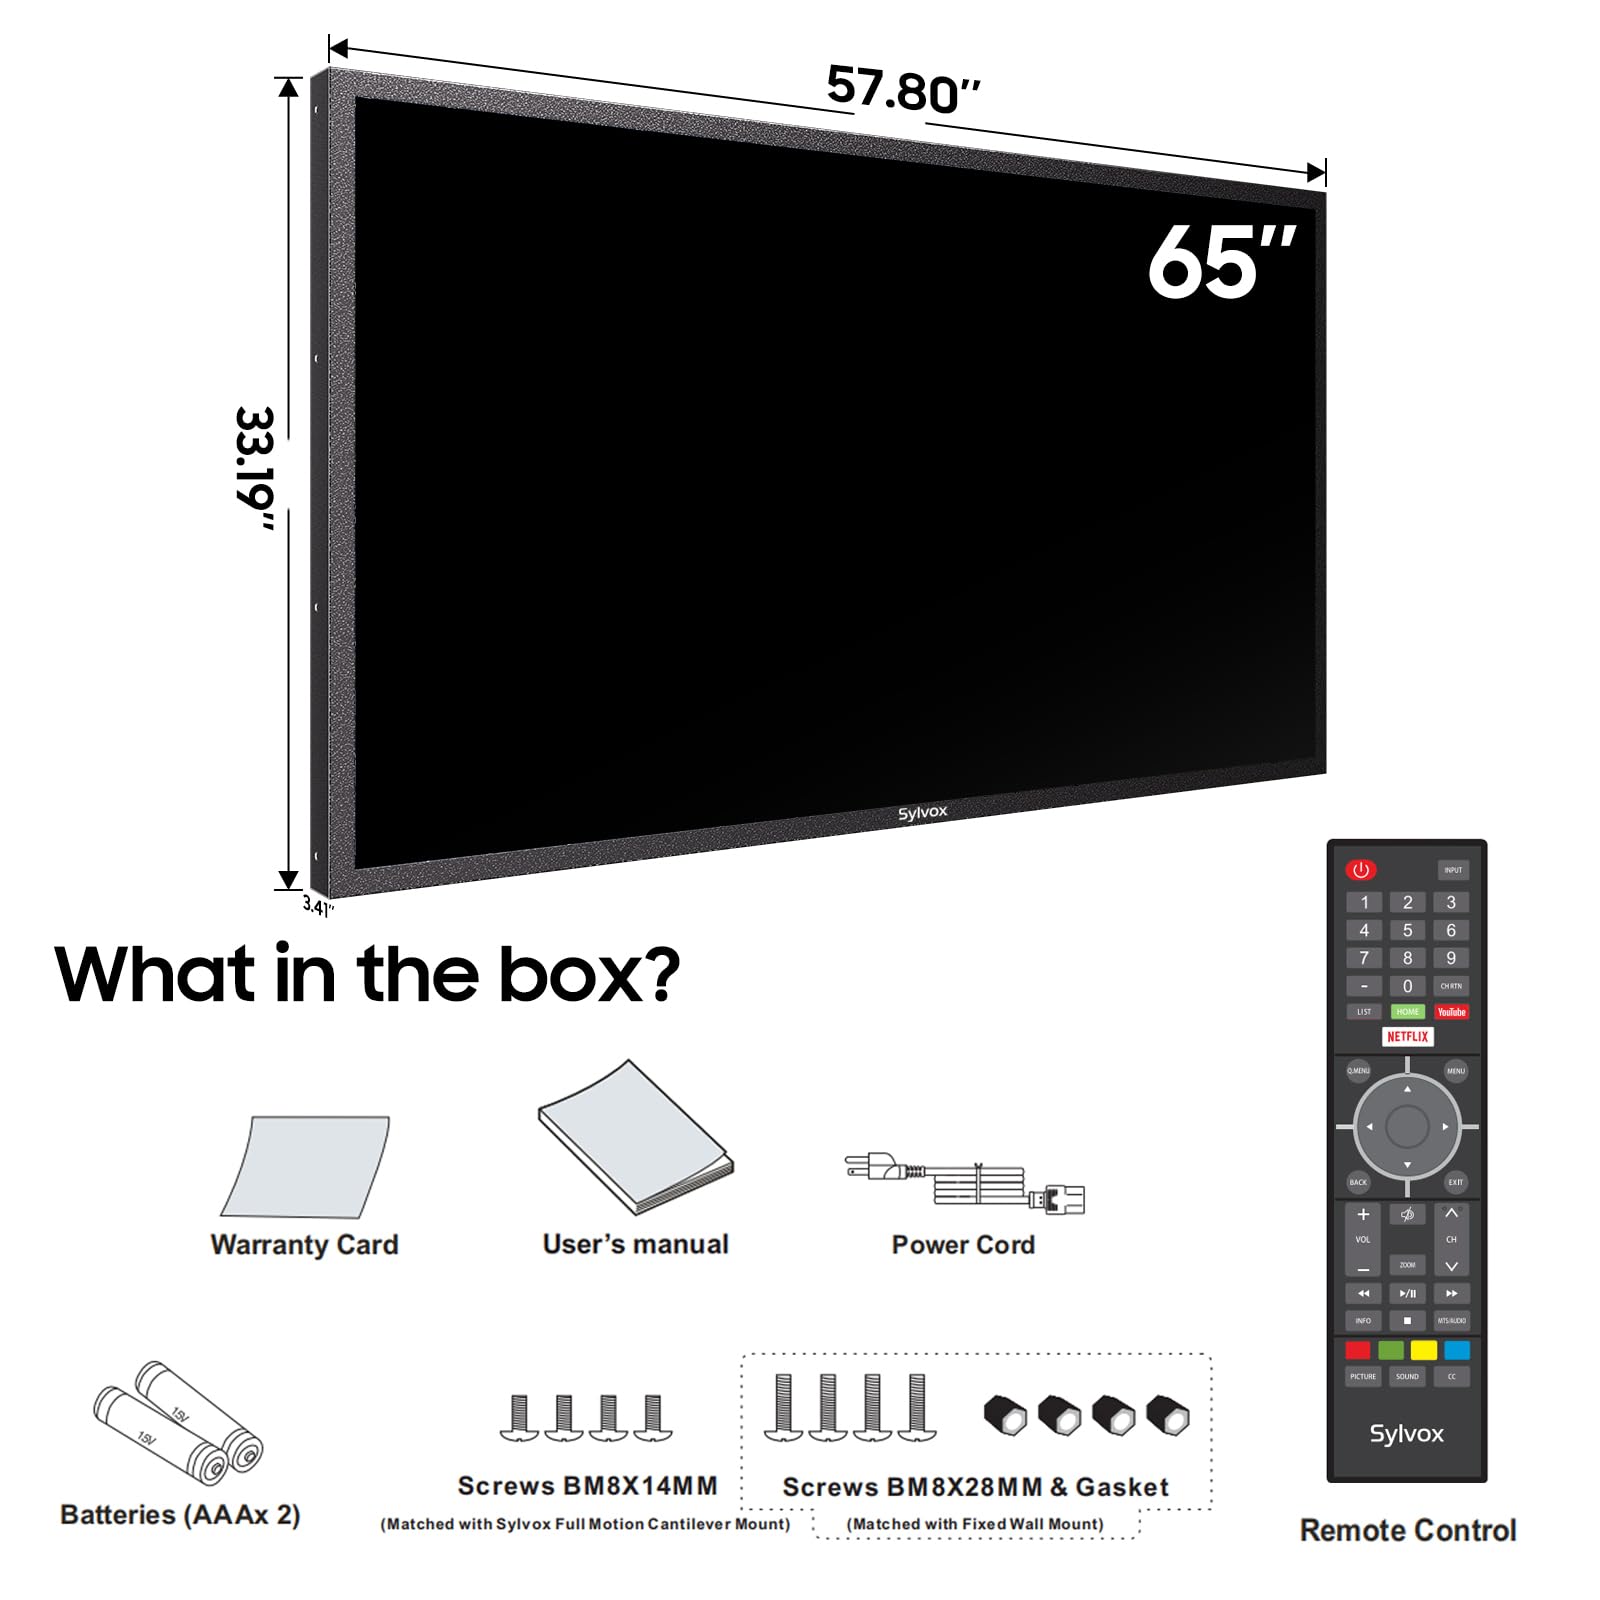 SYLVOX 65 inch Outdoor Signage TV, 1000nits for Partial Sun, IP66 Waterproof Outdoor TV, 4K UHD Commercial TV for Business, ATSC & NTSC Tuner, Support Bluetooth & 2.4G WiFi (Signage 1.0 Series)